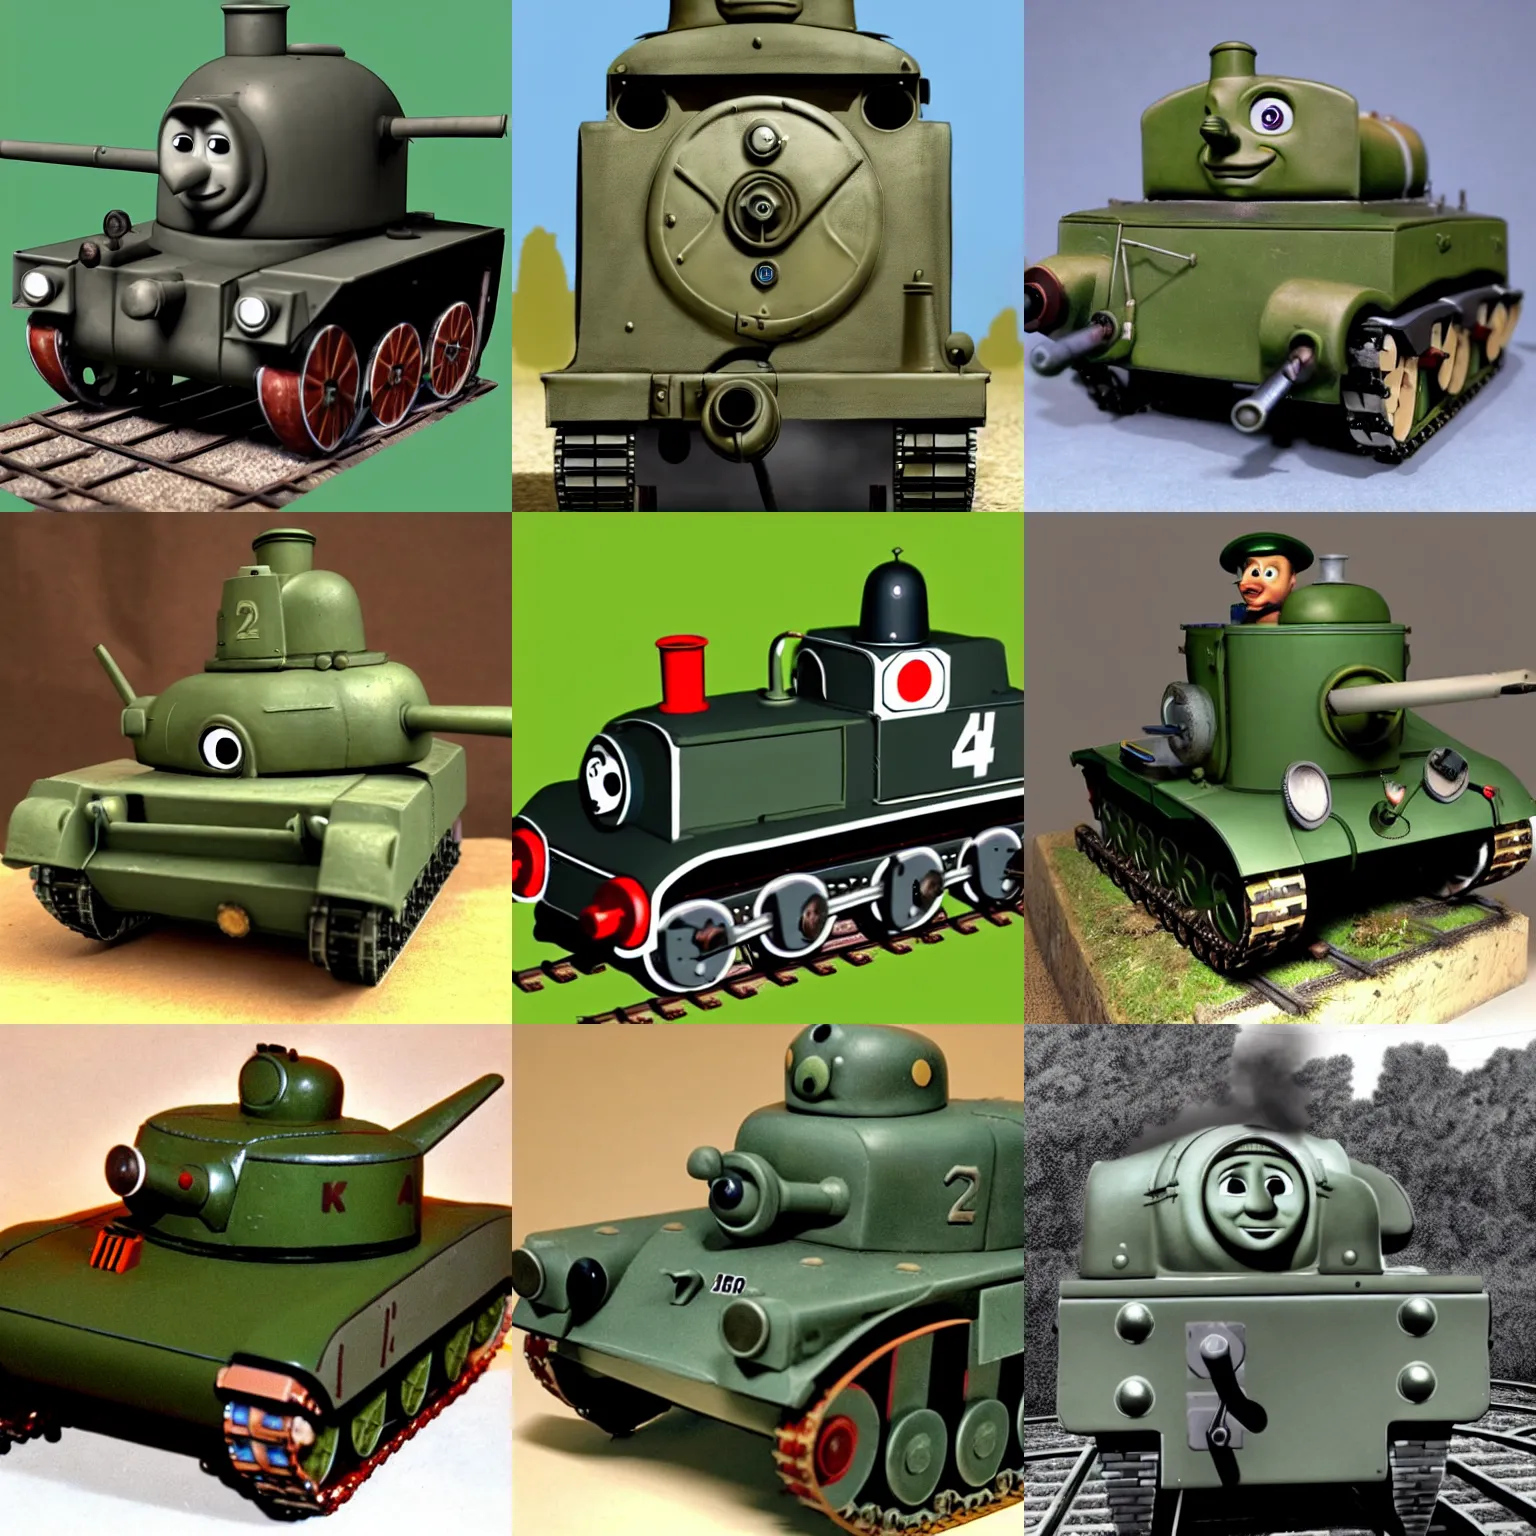 Prompt: an anthropomorphised panzer world war ii tank with a face, by wilbert awdry in the art style of thomas the tank engine